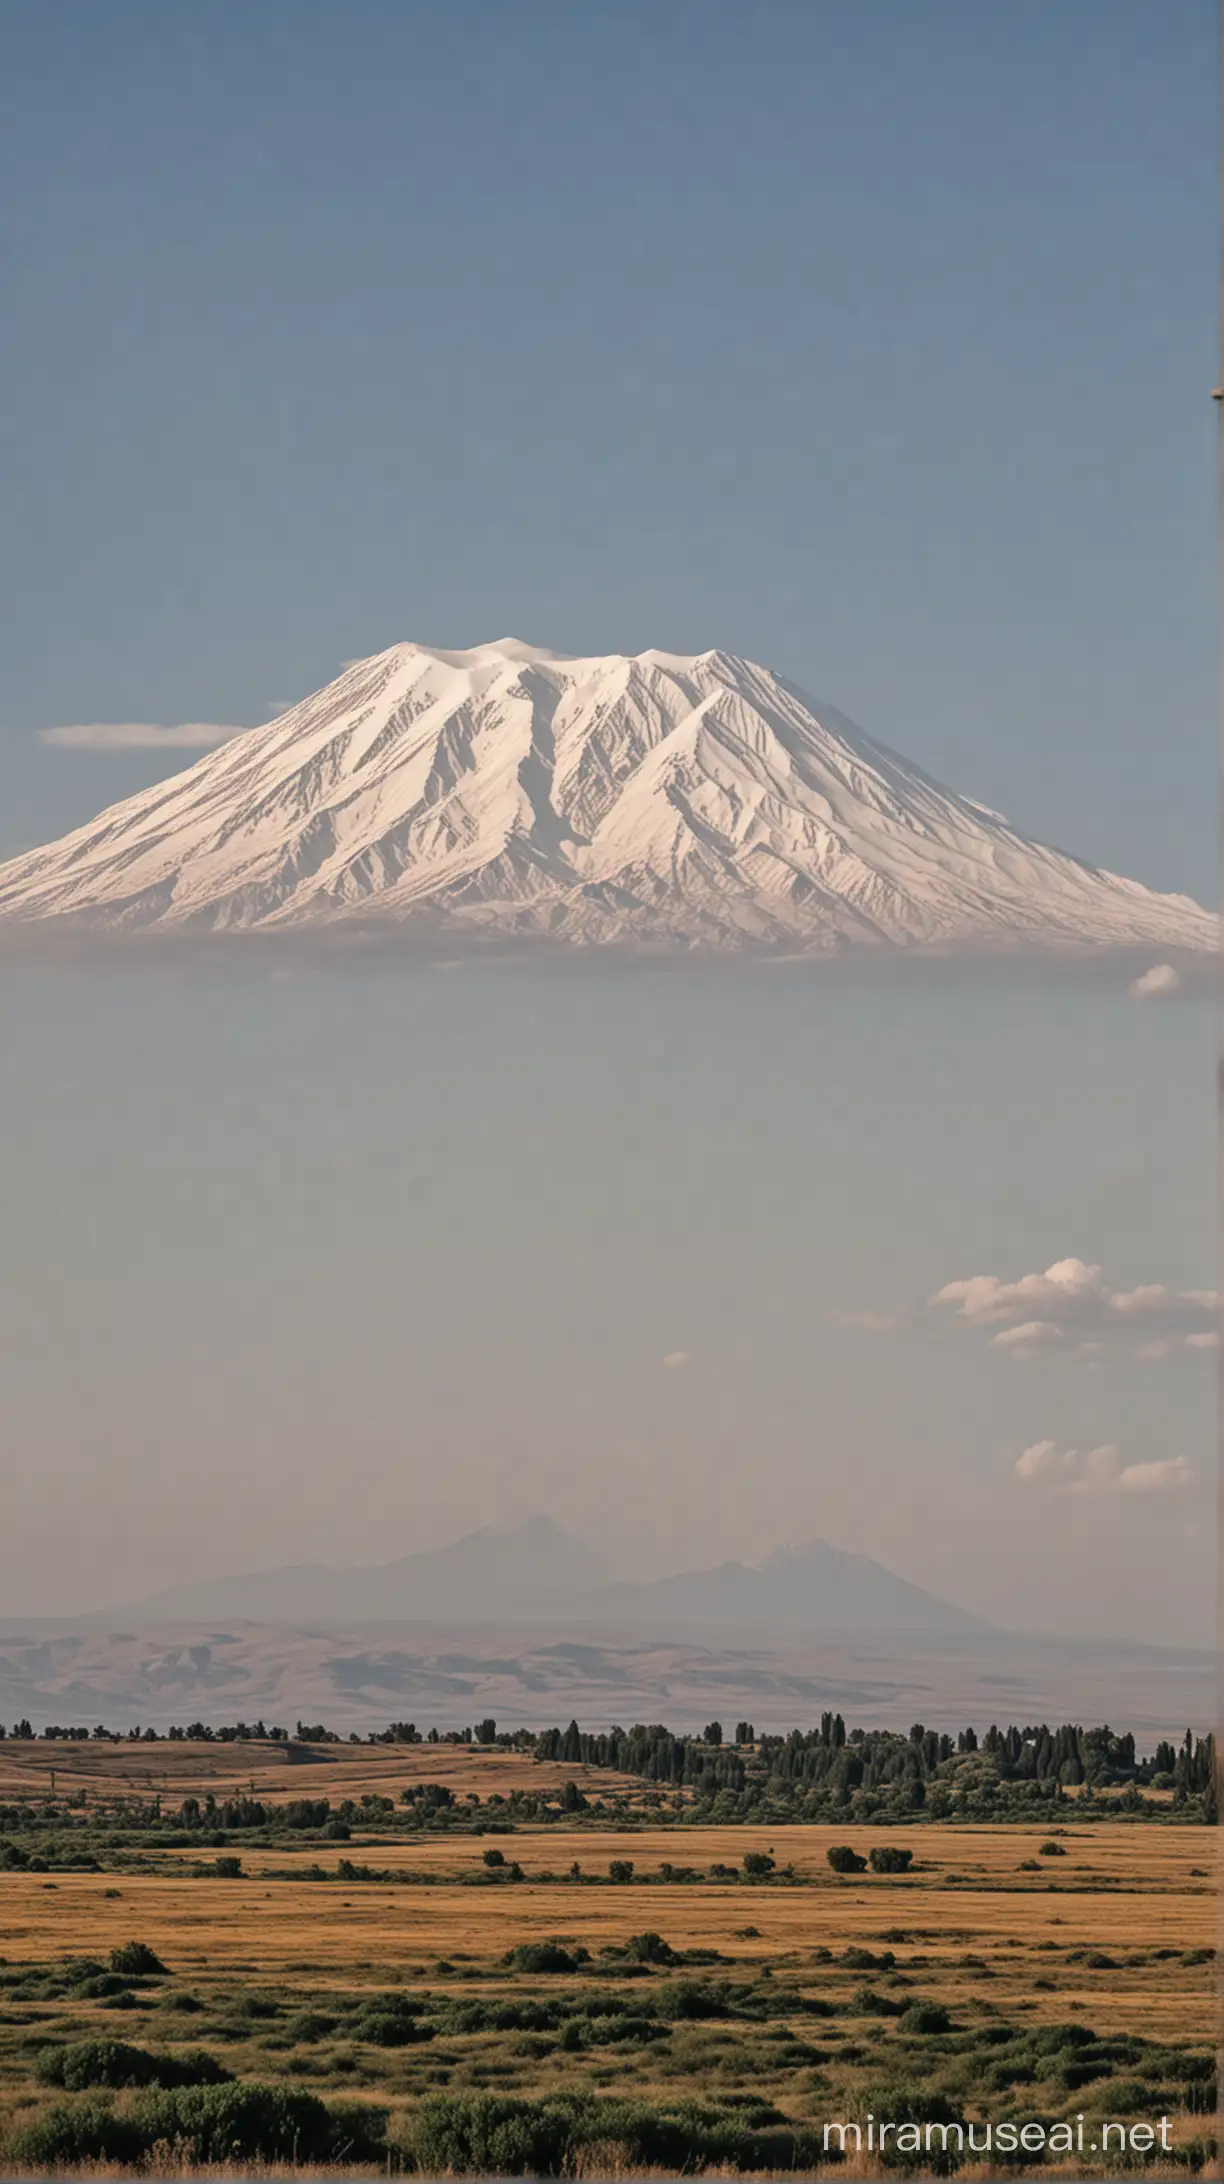 Majestic View of Mountain Ararat Bathed in Sunlight